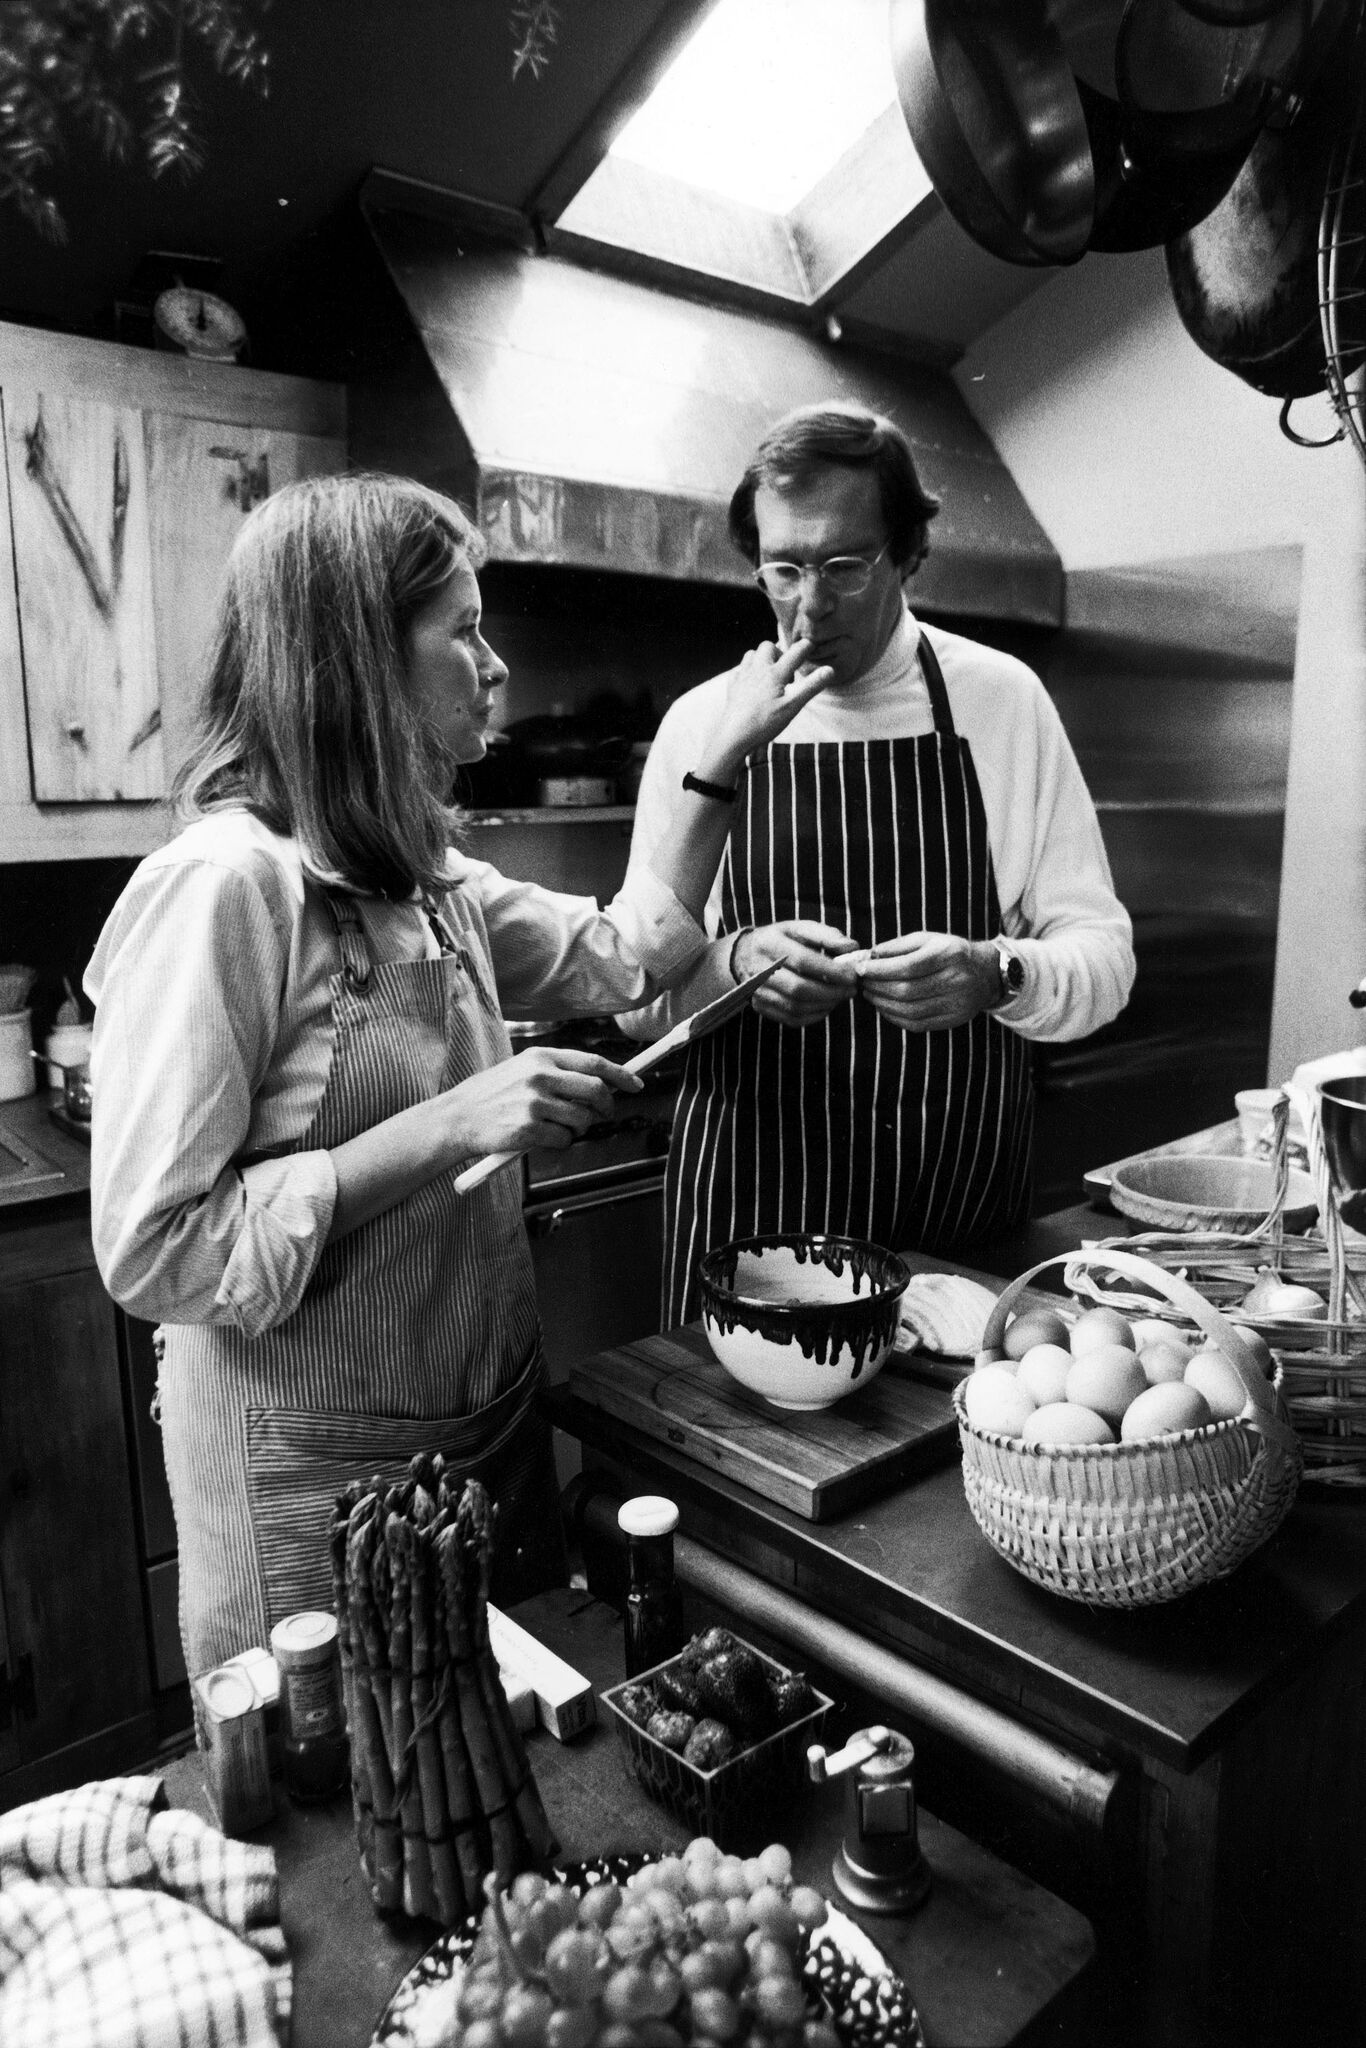 Caterer Martha Stewart and husband, publisher Andy Stewart, baking in their kitchen | Getty Images